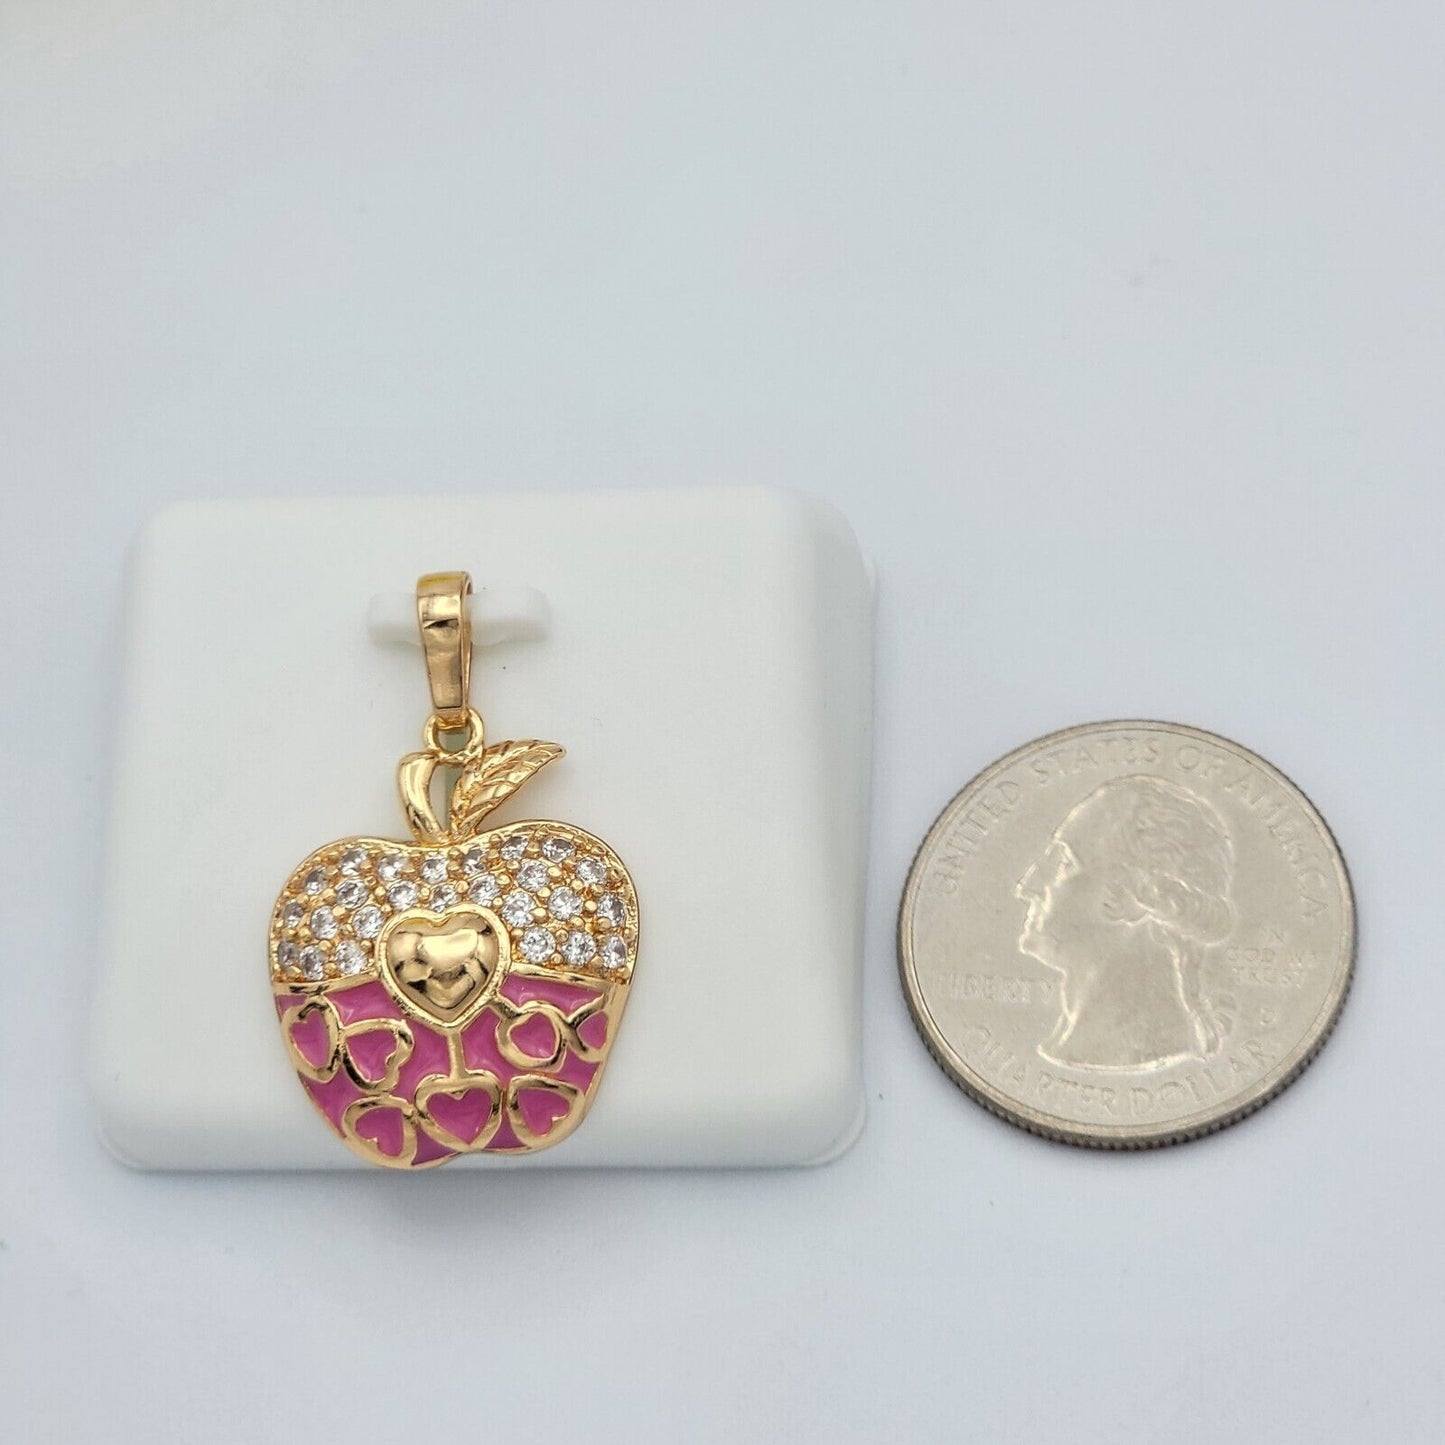 Necklaces - 18K Gold Plated. Hearts Pink Apple Pendant & Chain.